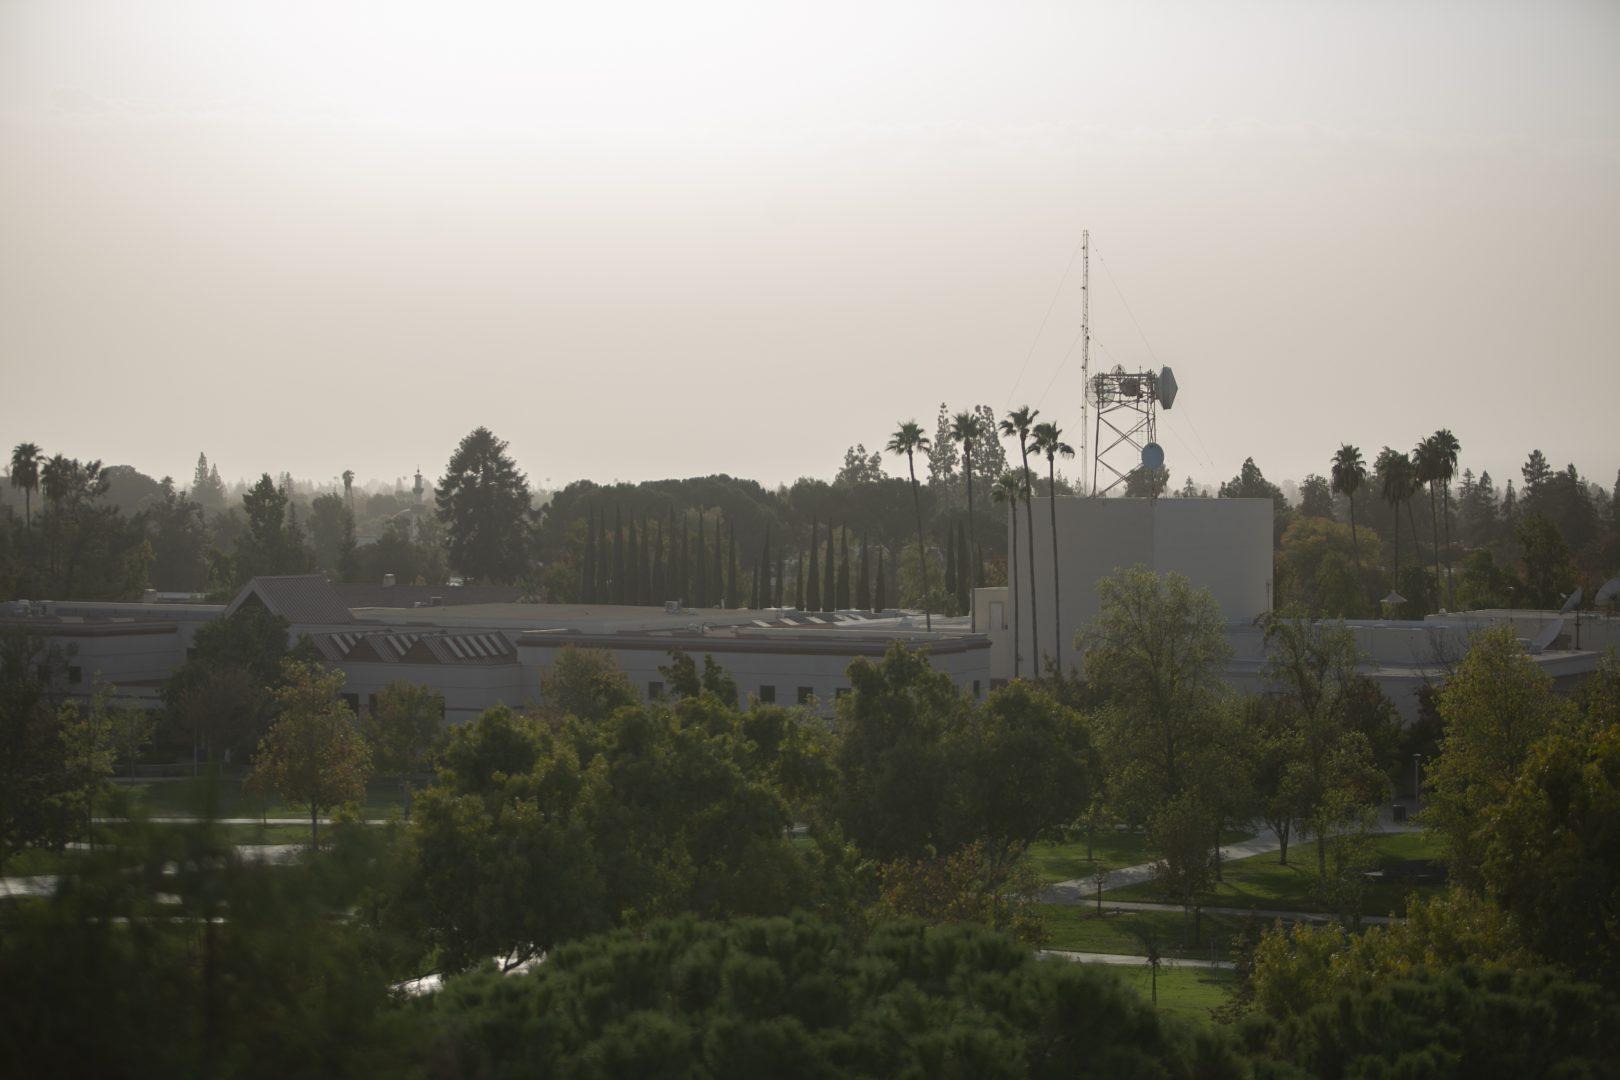 A haze is visible in the air above the Fresno State campus on Oct. 27. If air quality conditions due not improve, the university will modify or cancel outdoor classes and activities on Oct. 28. (Larry Valenzuela/The Collegian)